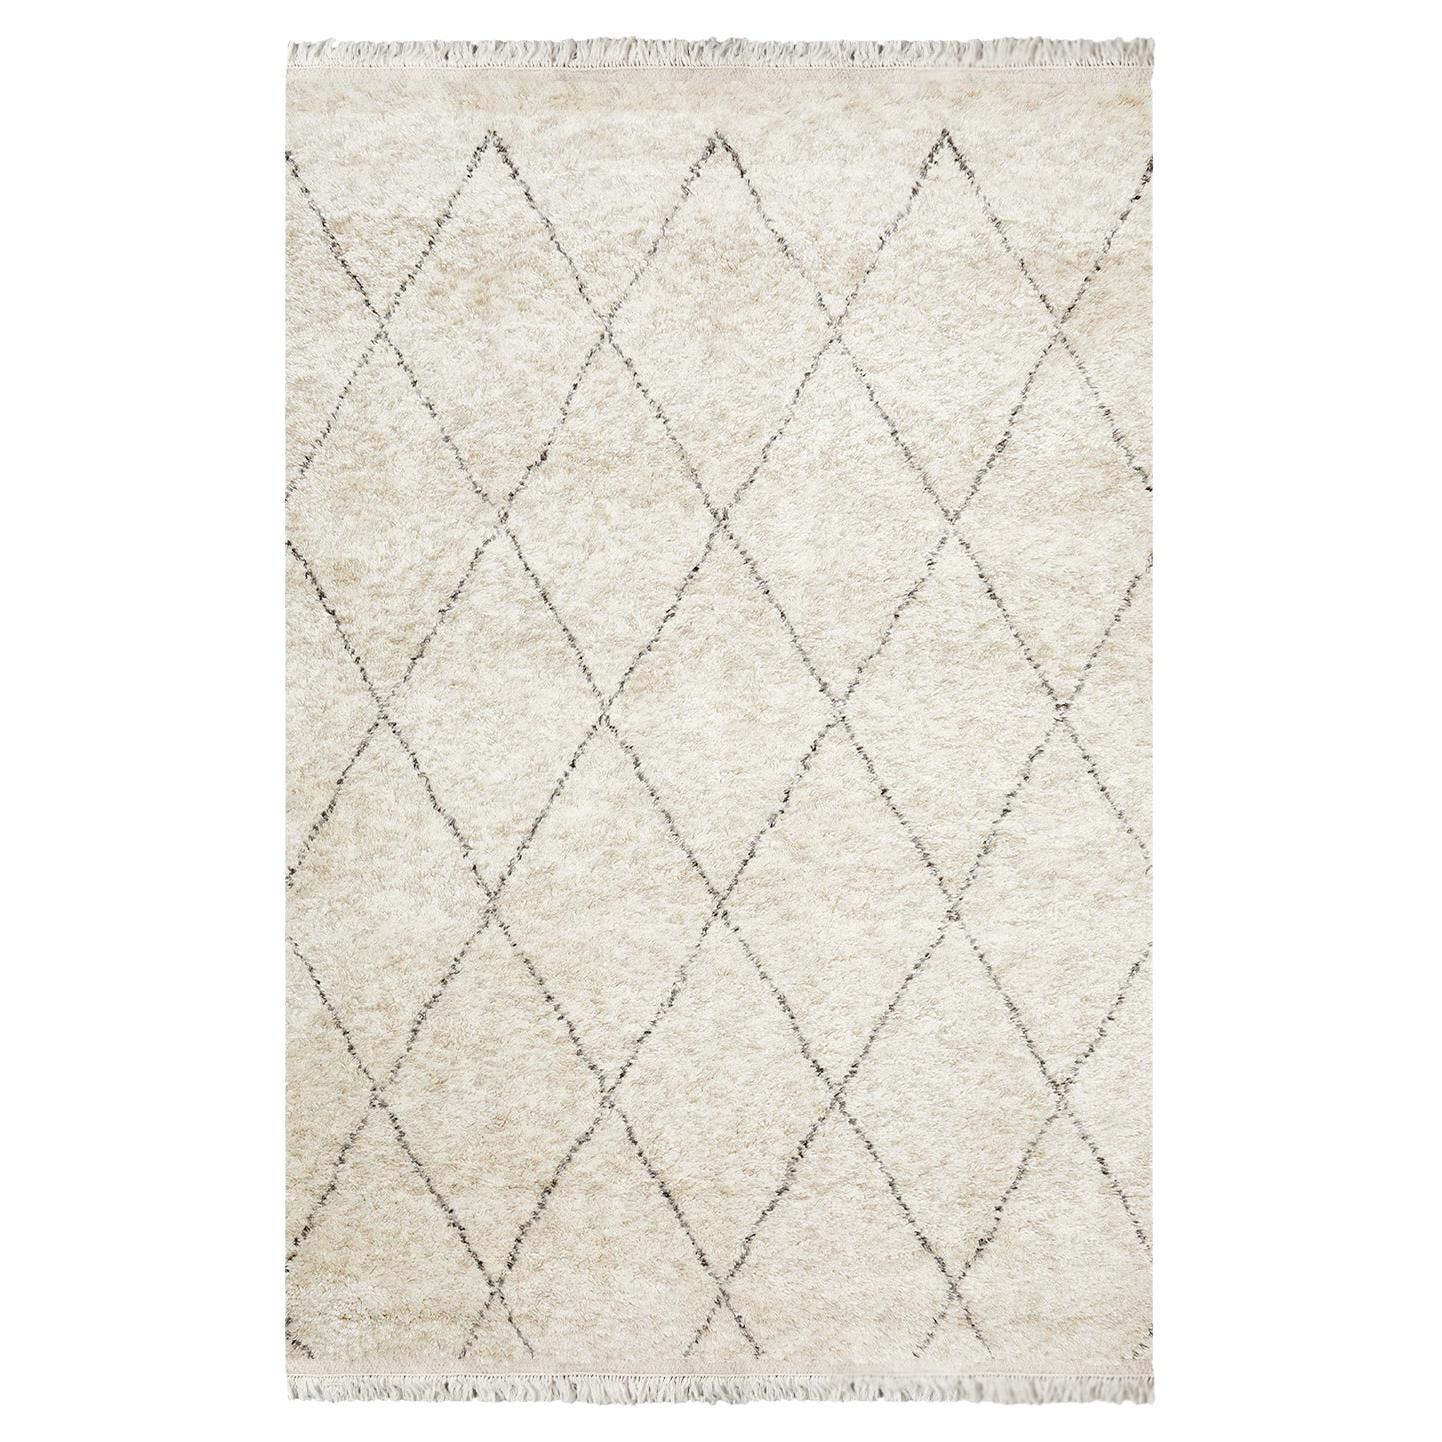 Solo Rugs Shaggy Moroccan Hand Knotted Beige Area Rug